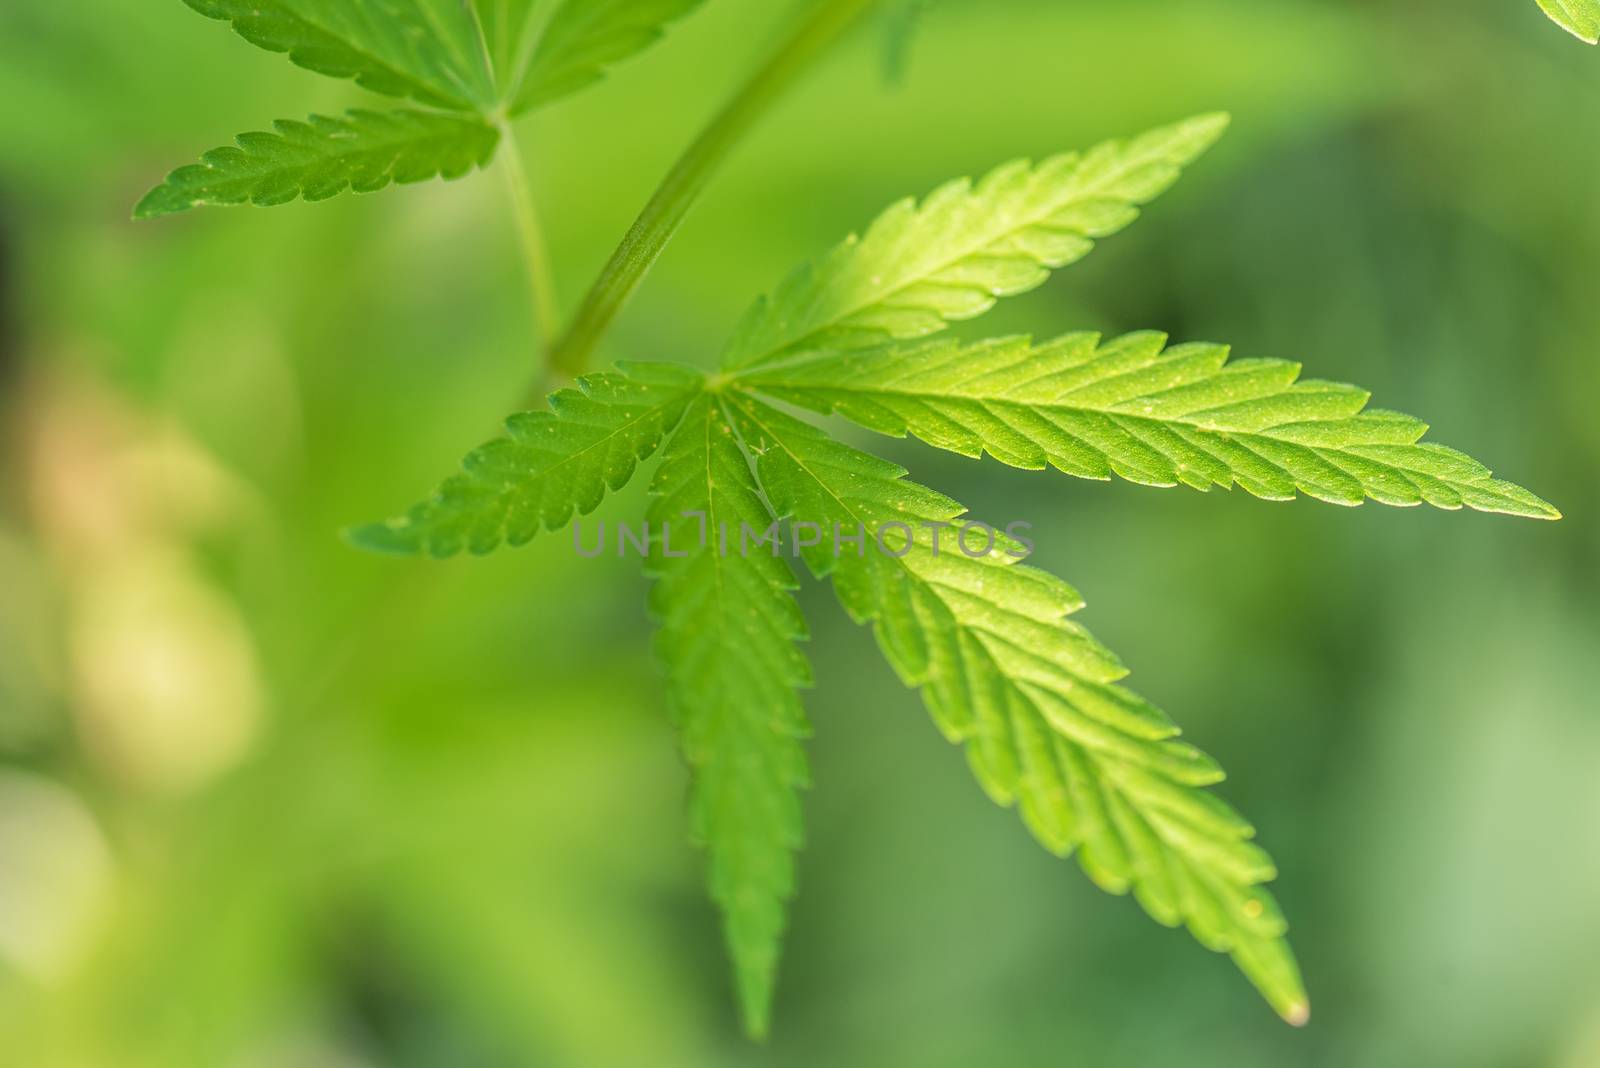 Cannabis bush close up. Drugs or medical marijuana. Copy space for text.